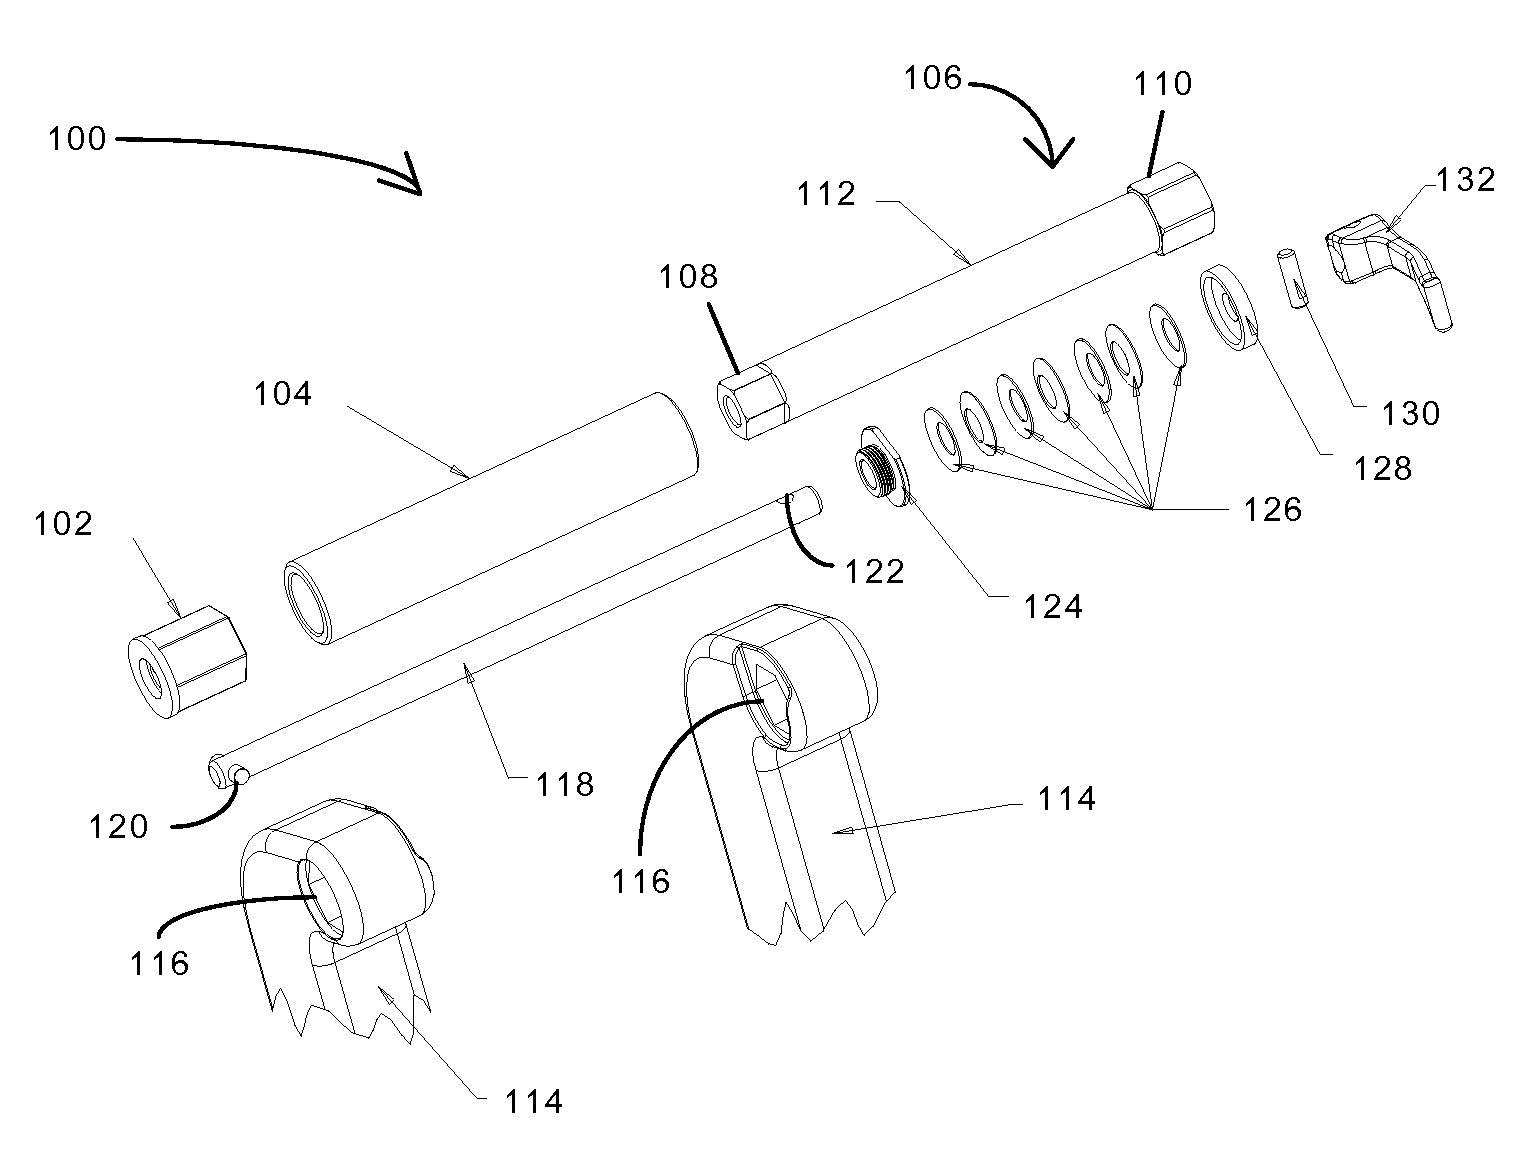 Apparatus for twist-to-lock retention of a wheel